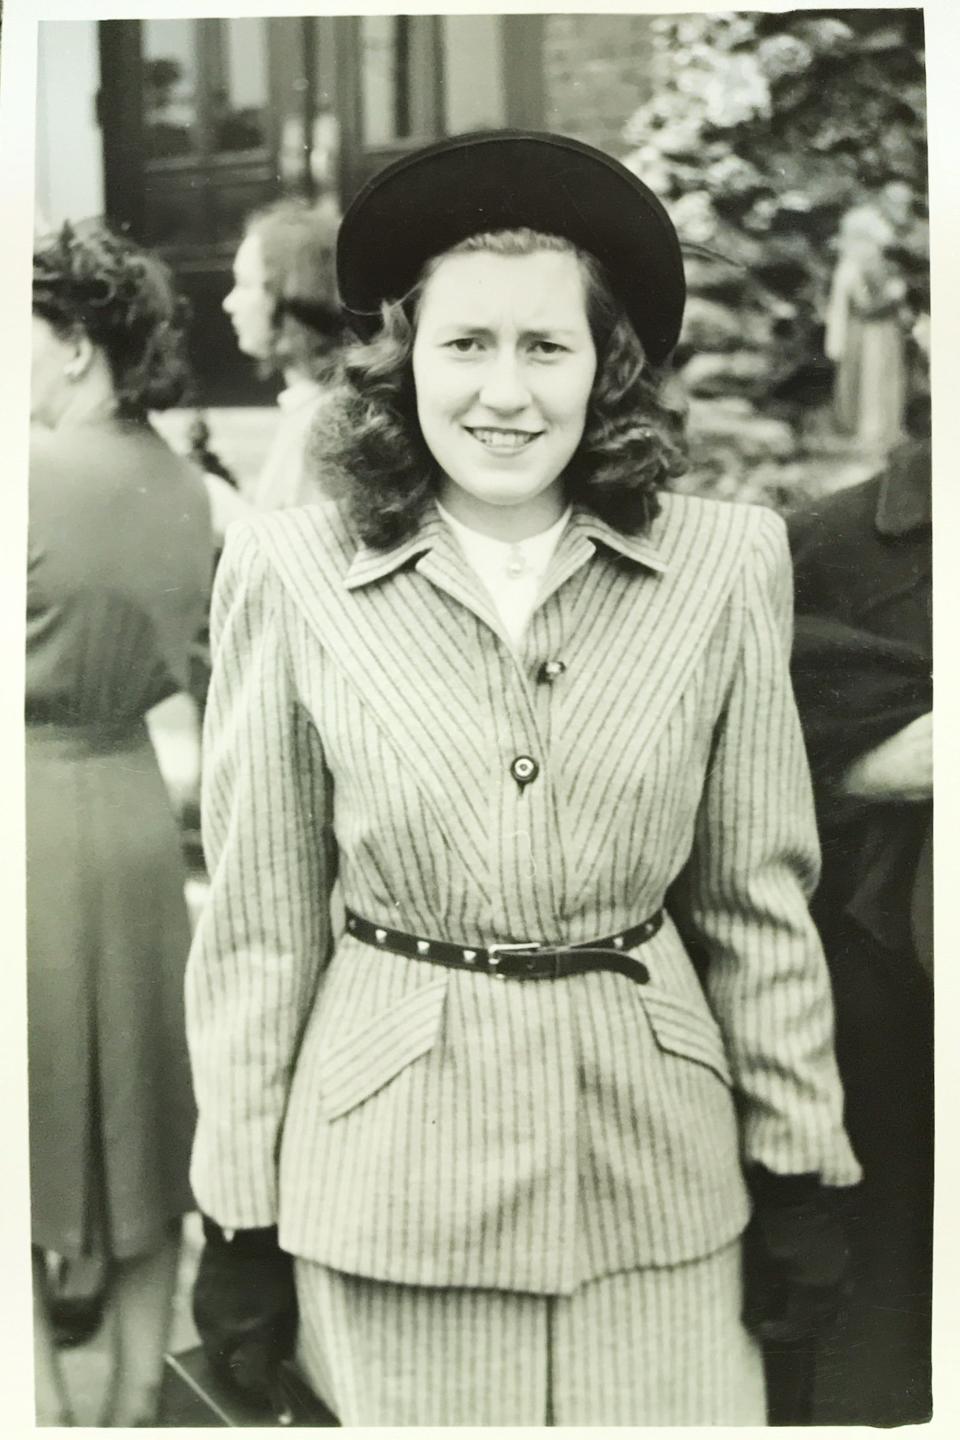 Rita Murphy, now 91, in a photo taken in the 1940s. Murphy, from Chicago, felt feverish and weak one day as a high school freshman and later learned that she had contracted polio. She ended up wearing a leg brace for the rest of her life, soldiering on in the face of hardship and sometimes cruelty. Today's coronavirus crisis, with its fear and social distancing, is making many polio-era survivors recall those days before Jonas Salk found a vaccine in 1955.